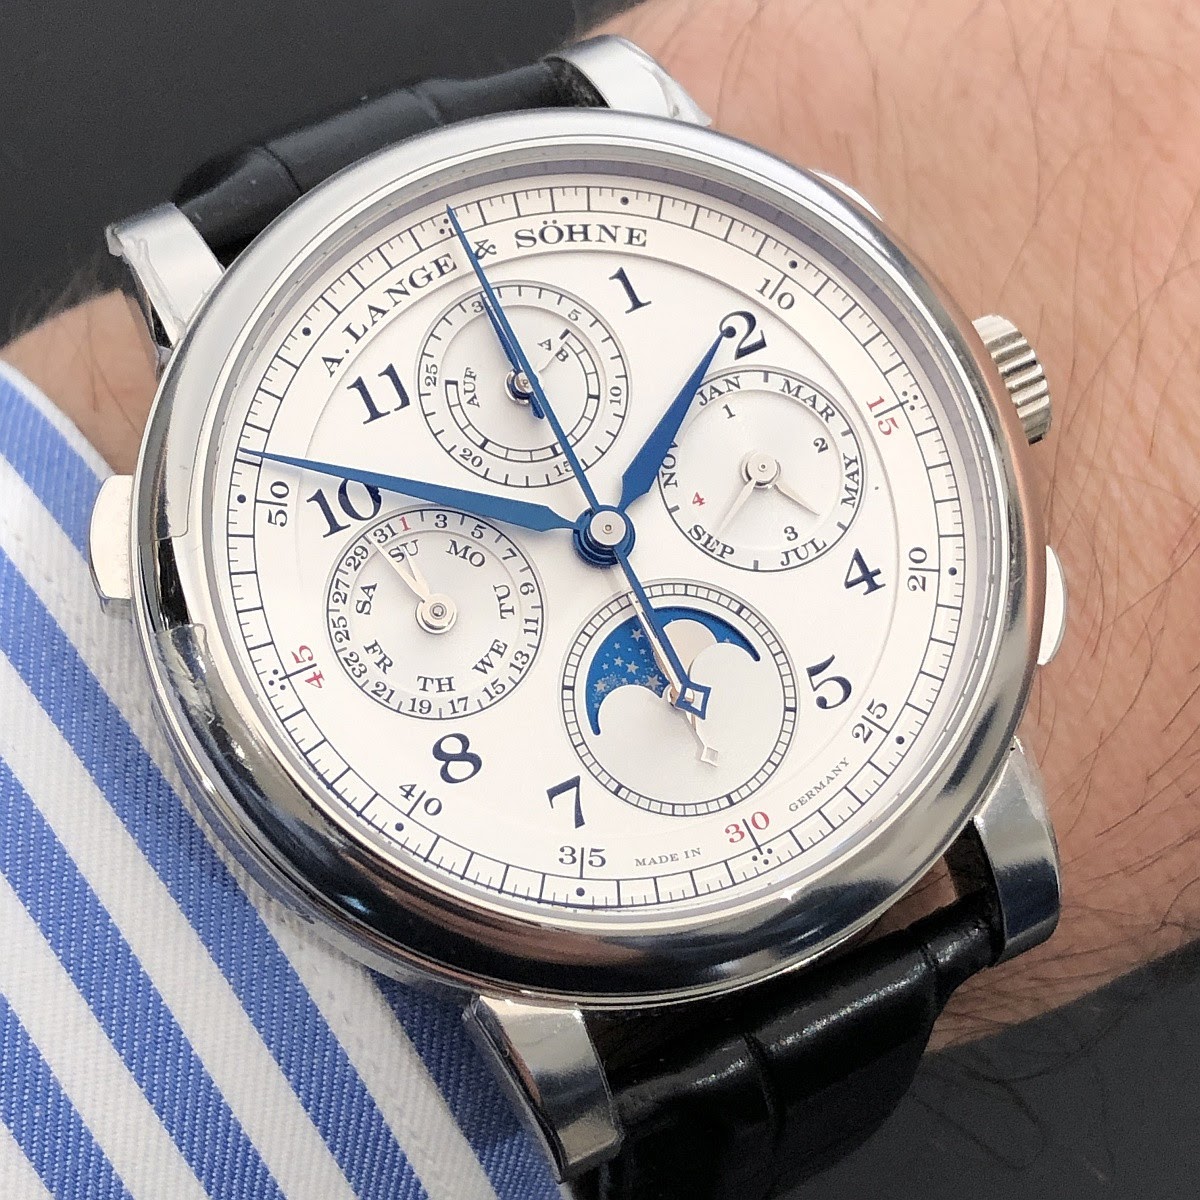 A.Lange & Sohne - The new Lange & Söhne boutique of Paris has just opened